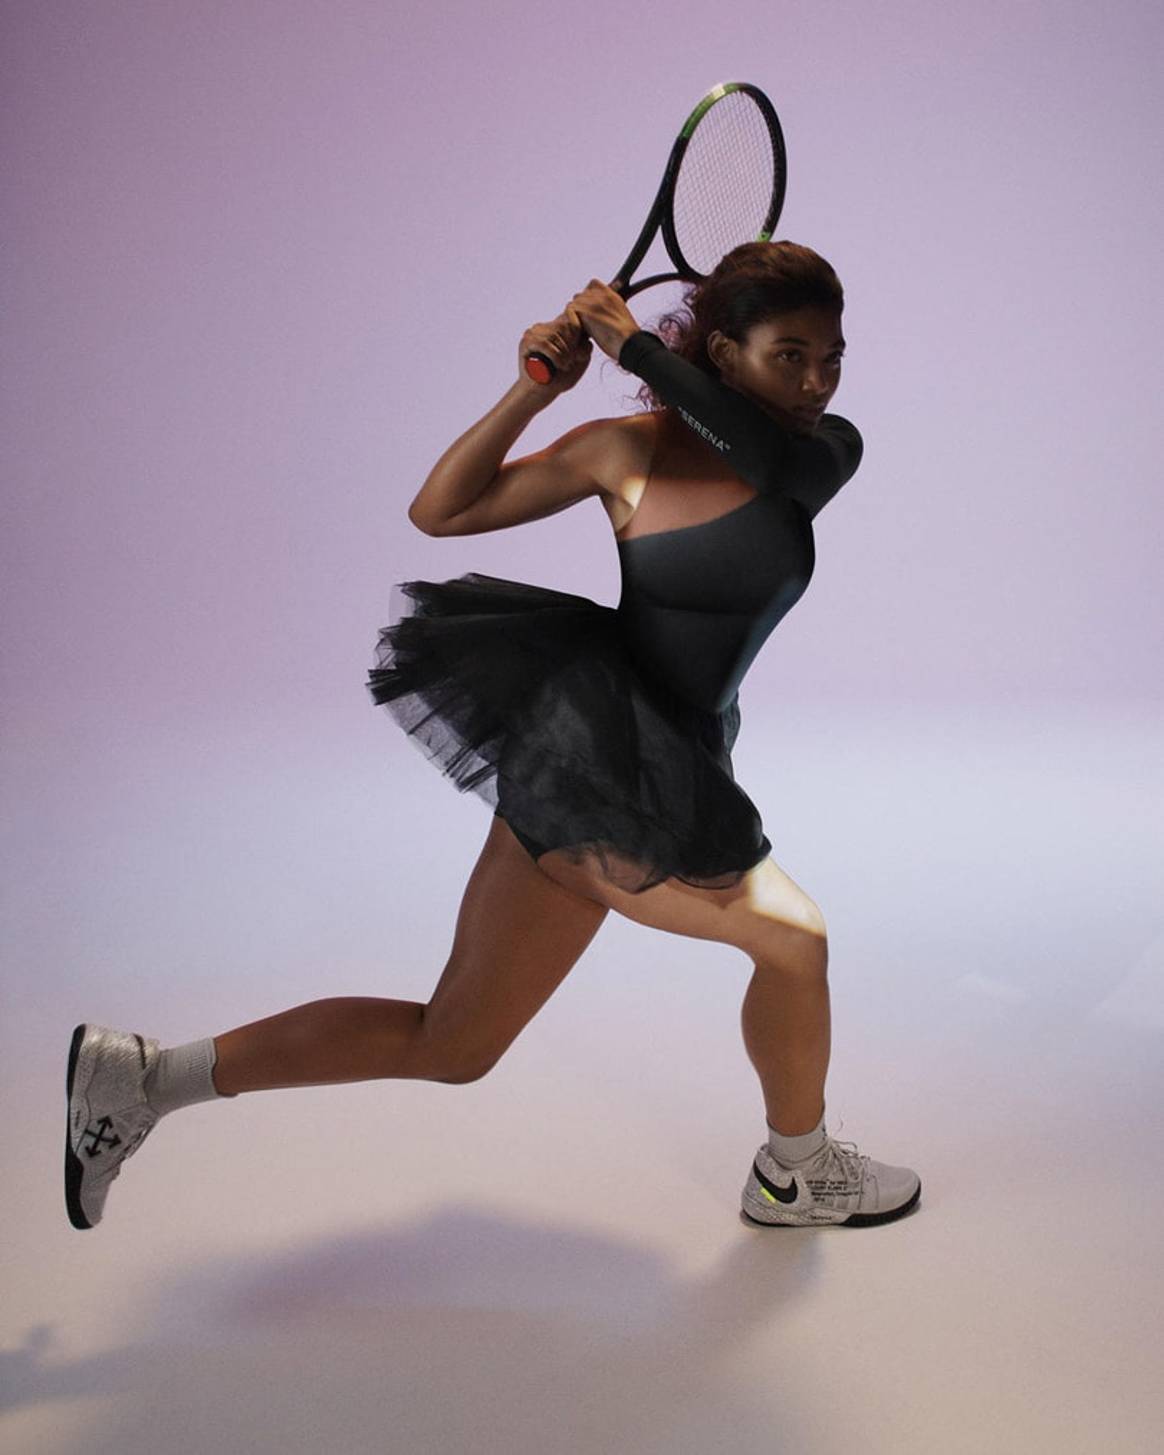 Virgil Abloh designs Nike collection for Serena Williams